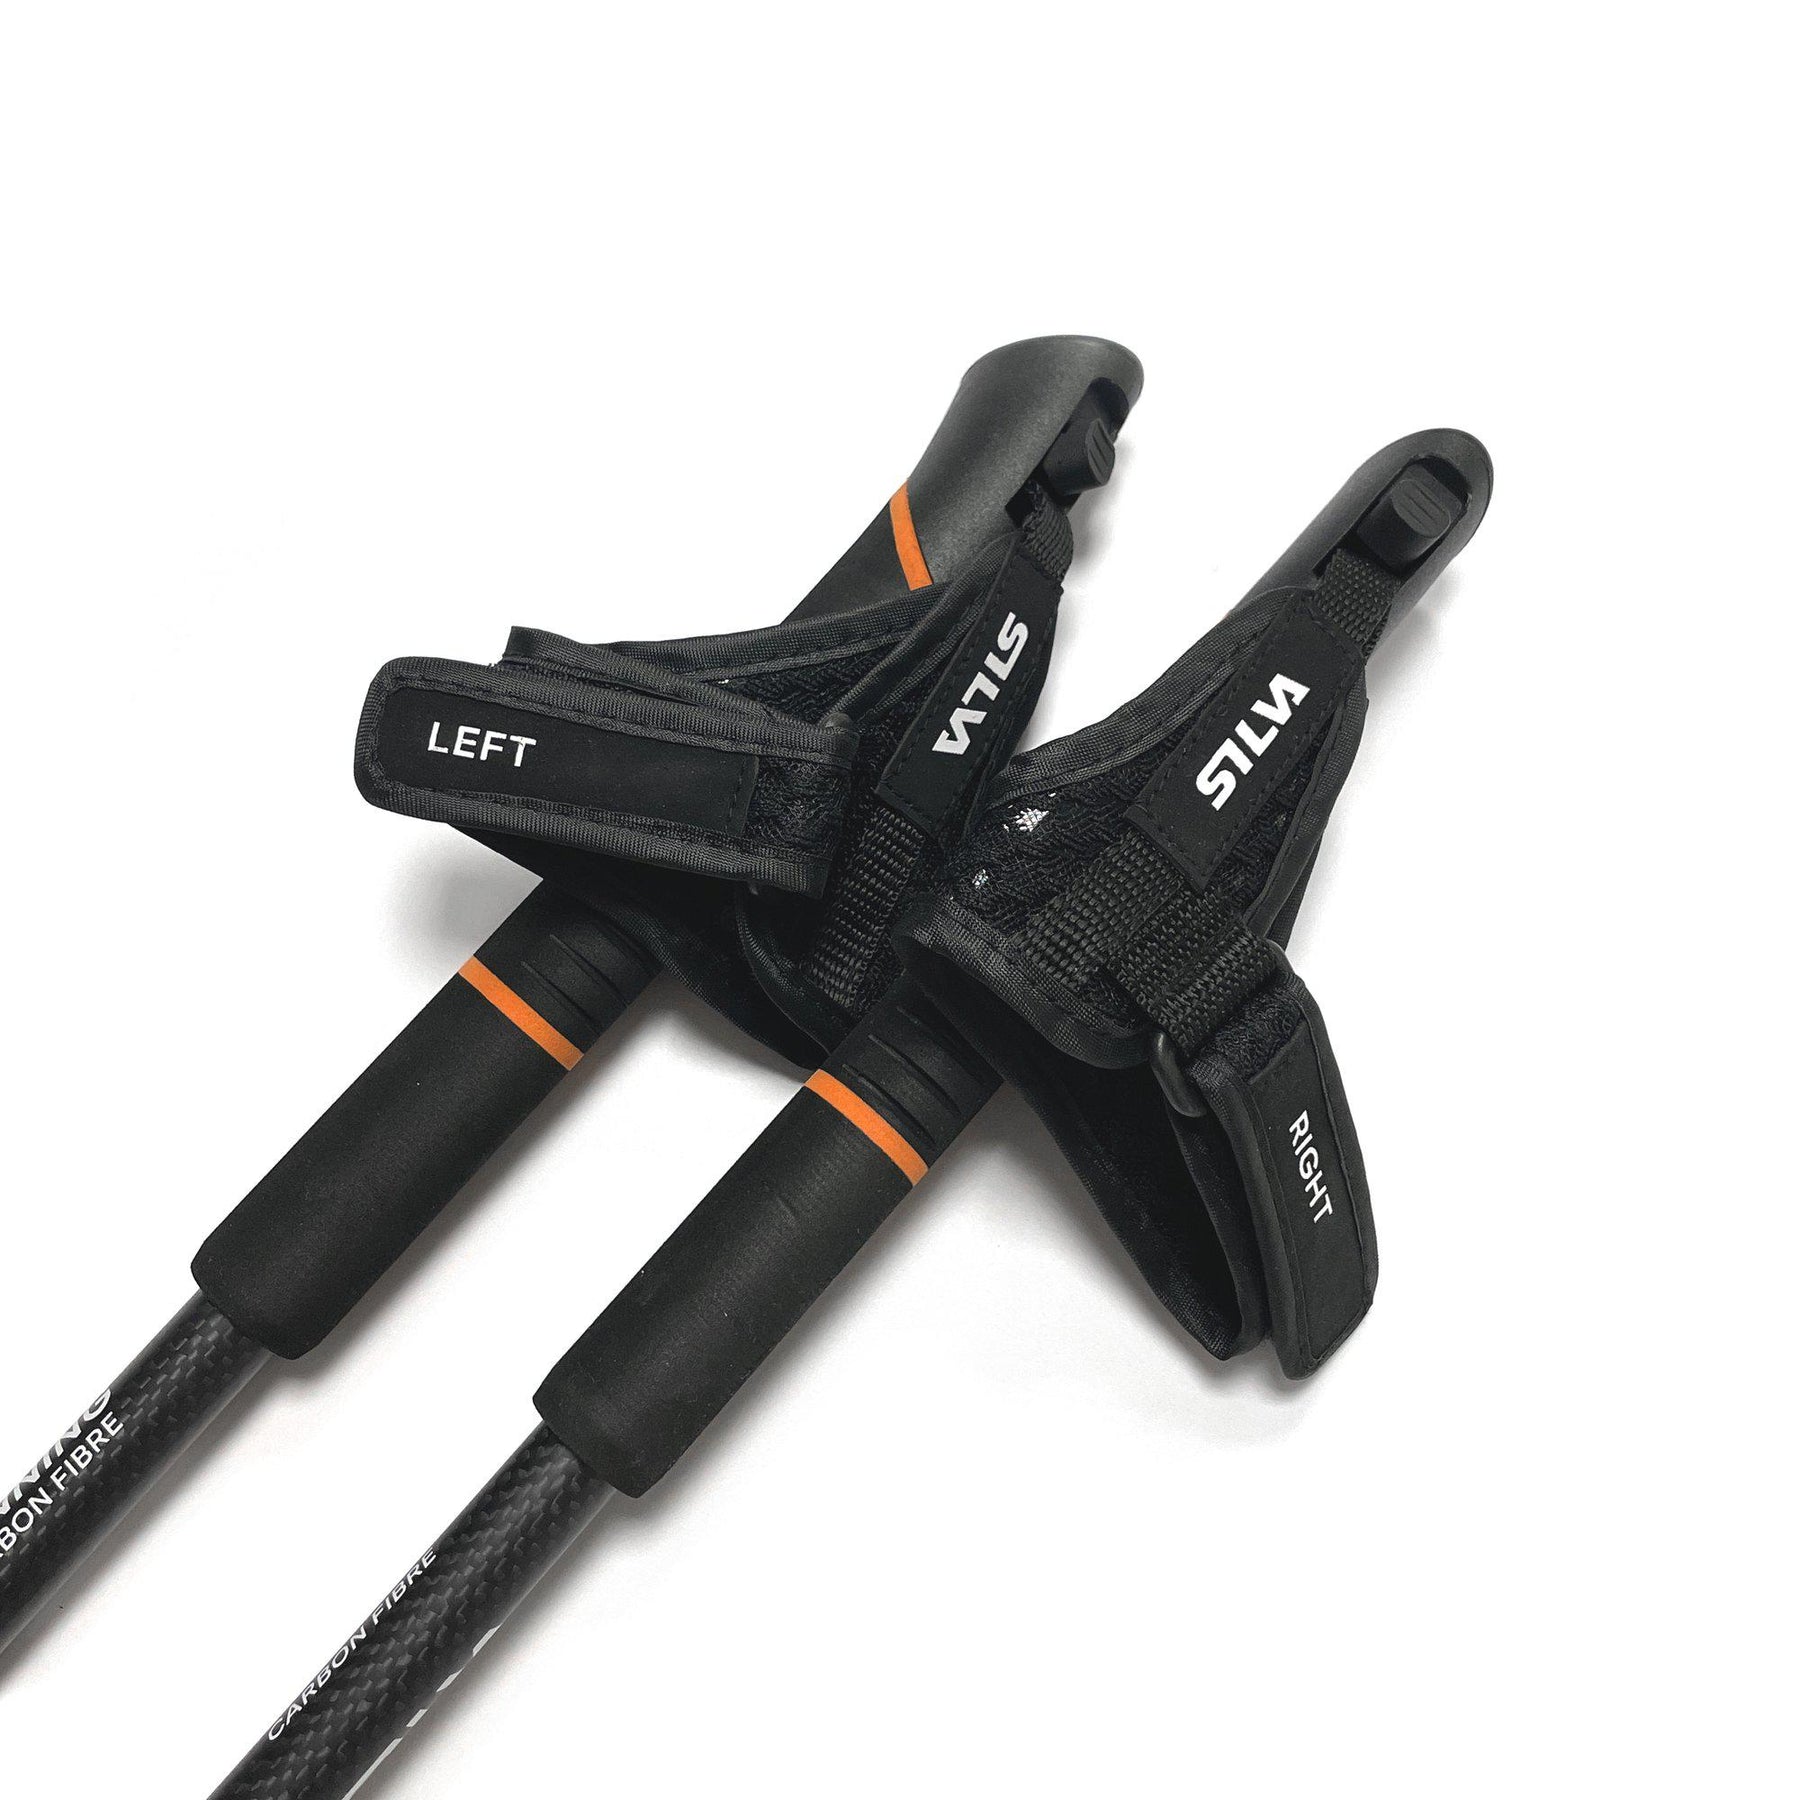 Silva Carbon Adjustable Running Poles: The Ultimate Trail Performance Boost